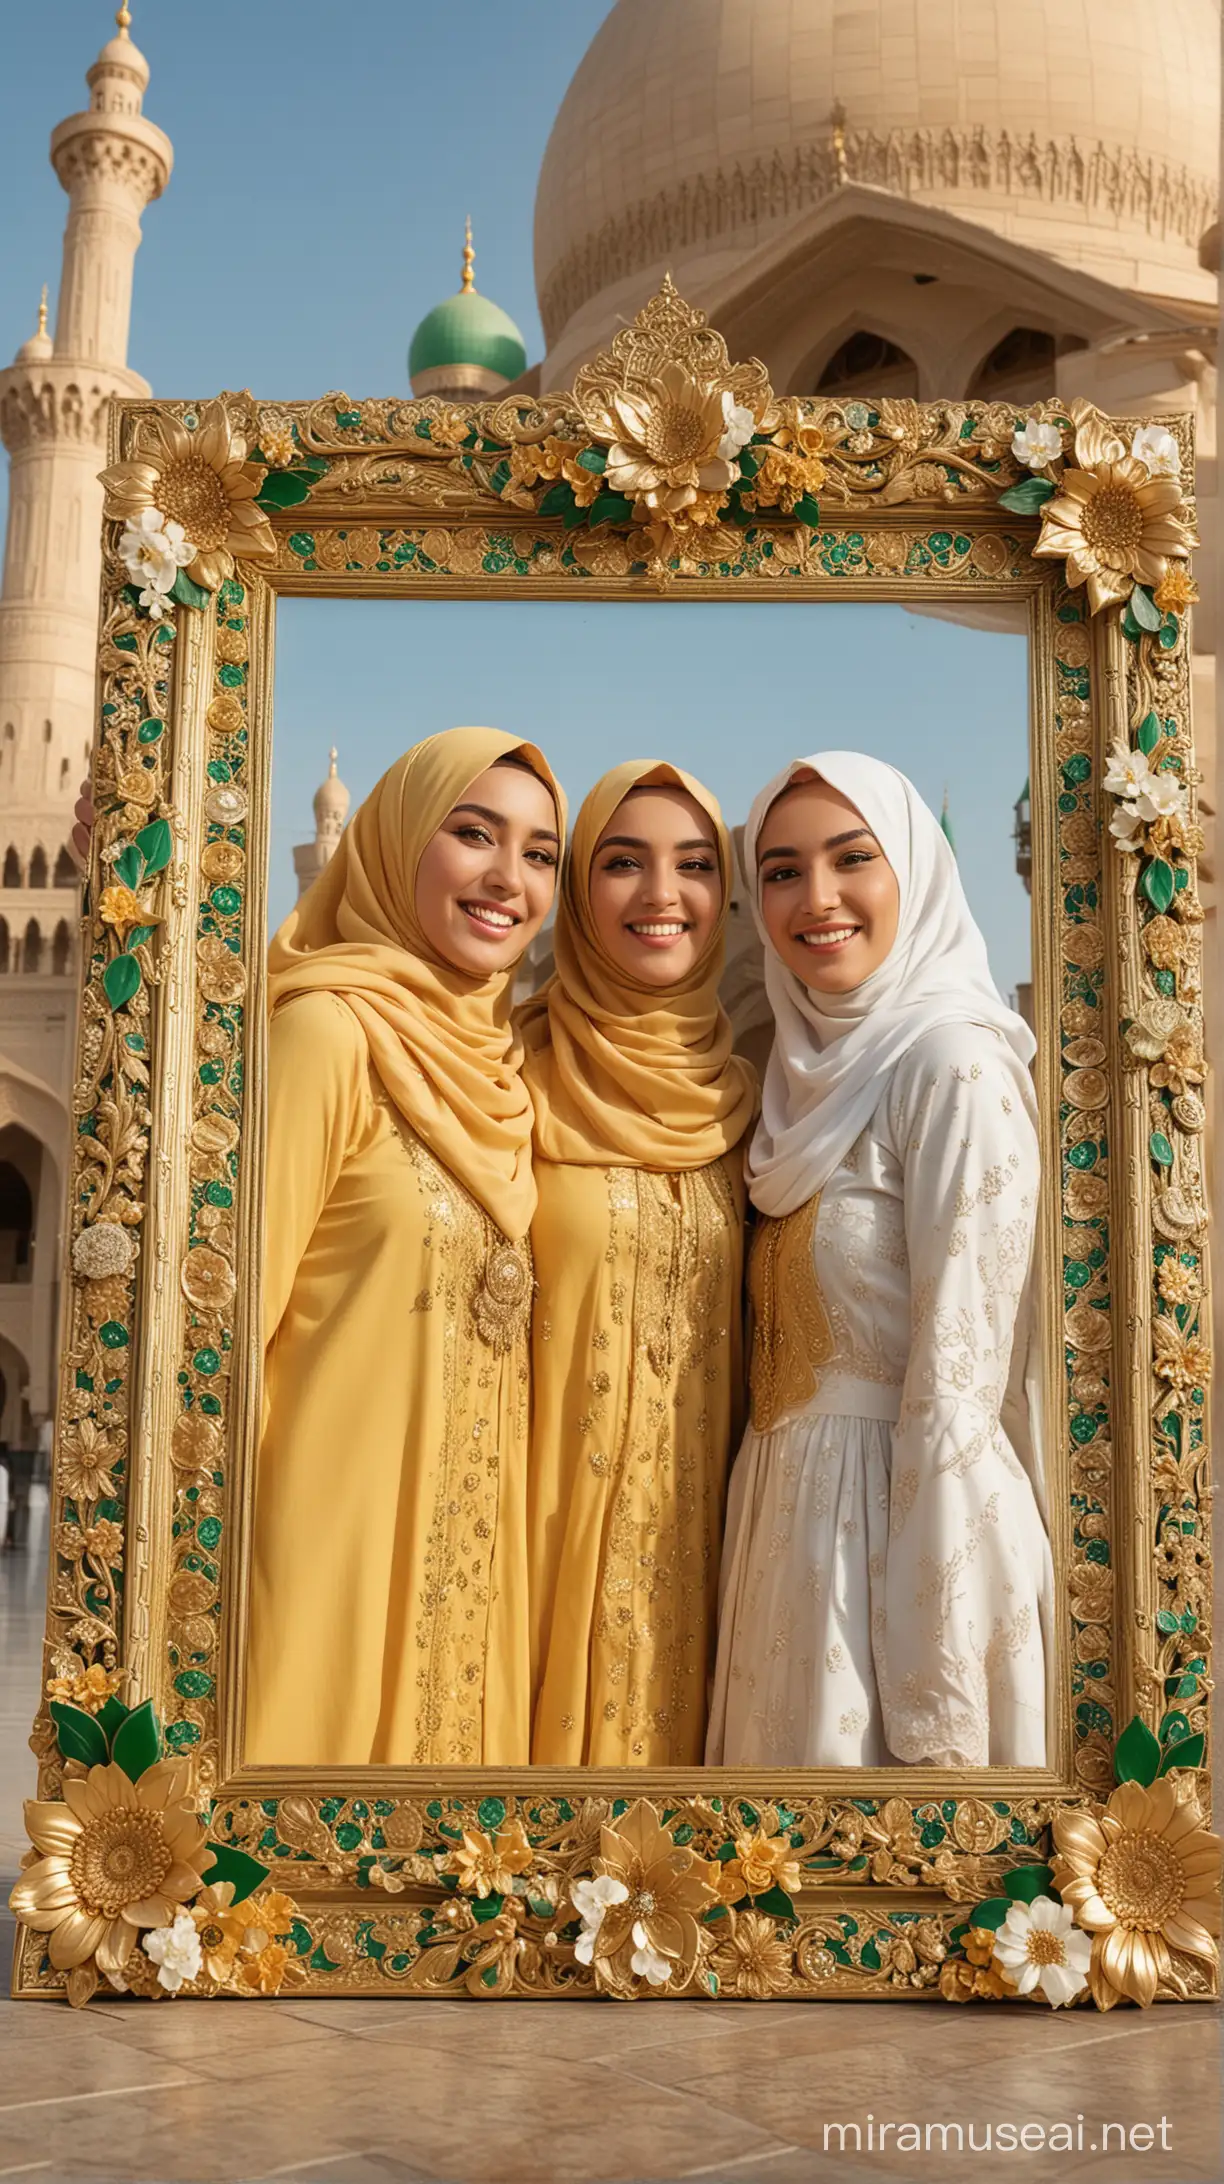 The Eid al-Fitr frame contains photos of three young women wearing hijabs, posing sweetly in front of a magnificent mosque, the women are wearing hijab robes & the edges of the frame are decorated with flowers that say "Selamat Idul Fitri 1445H" with gold embossing. The diamond decoration is yellow and green. Full body, very detailed. Original, realistic photos